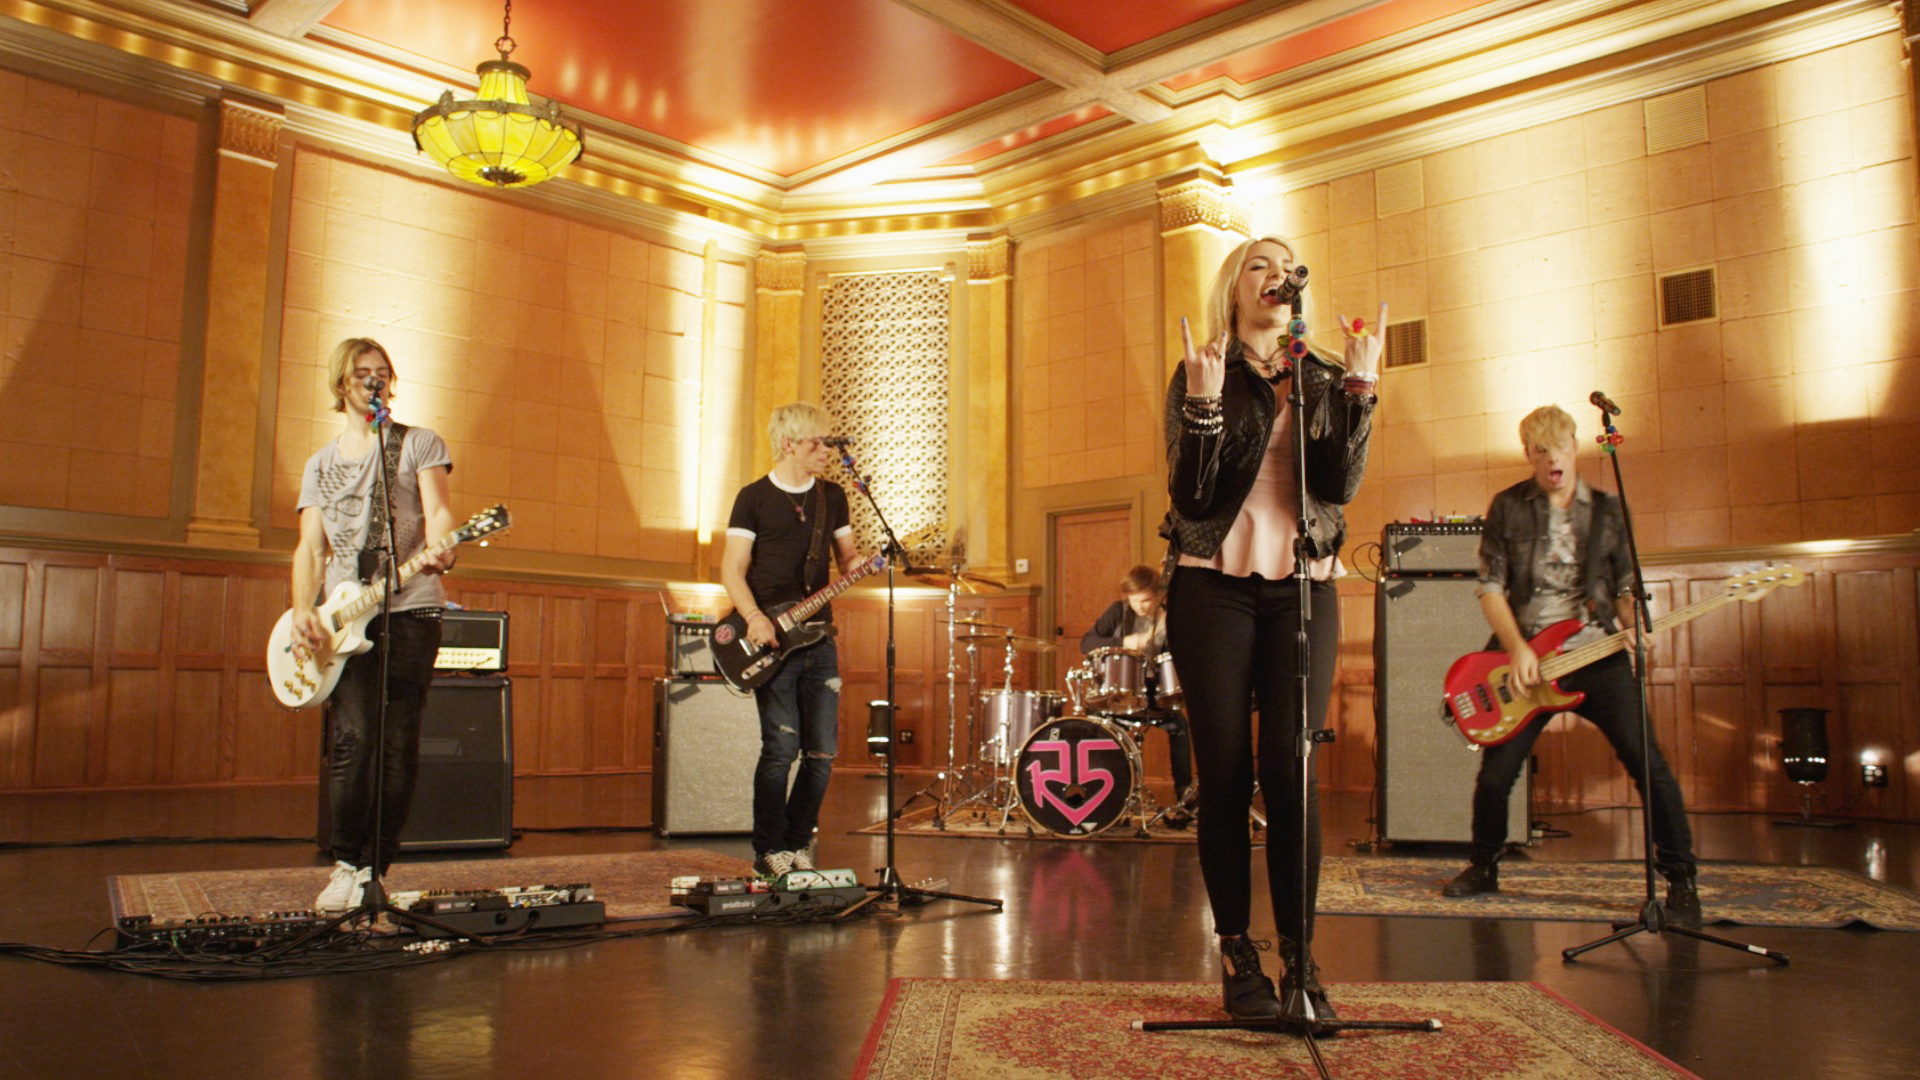 R5 and Ring Pop team up to #RockThatRock !